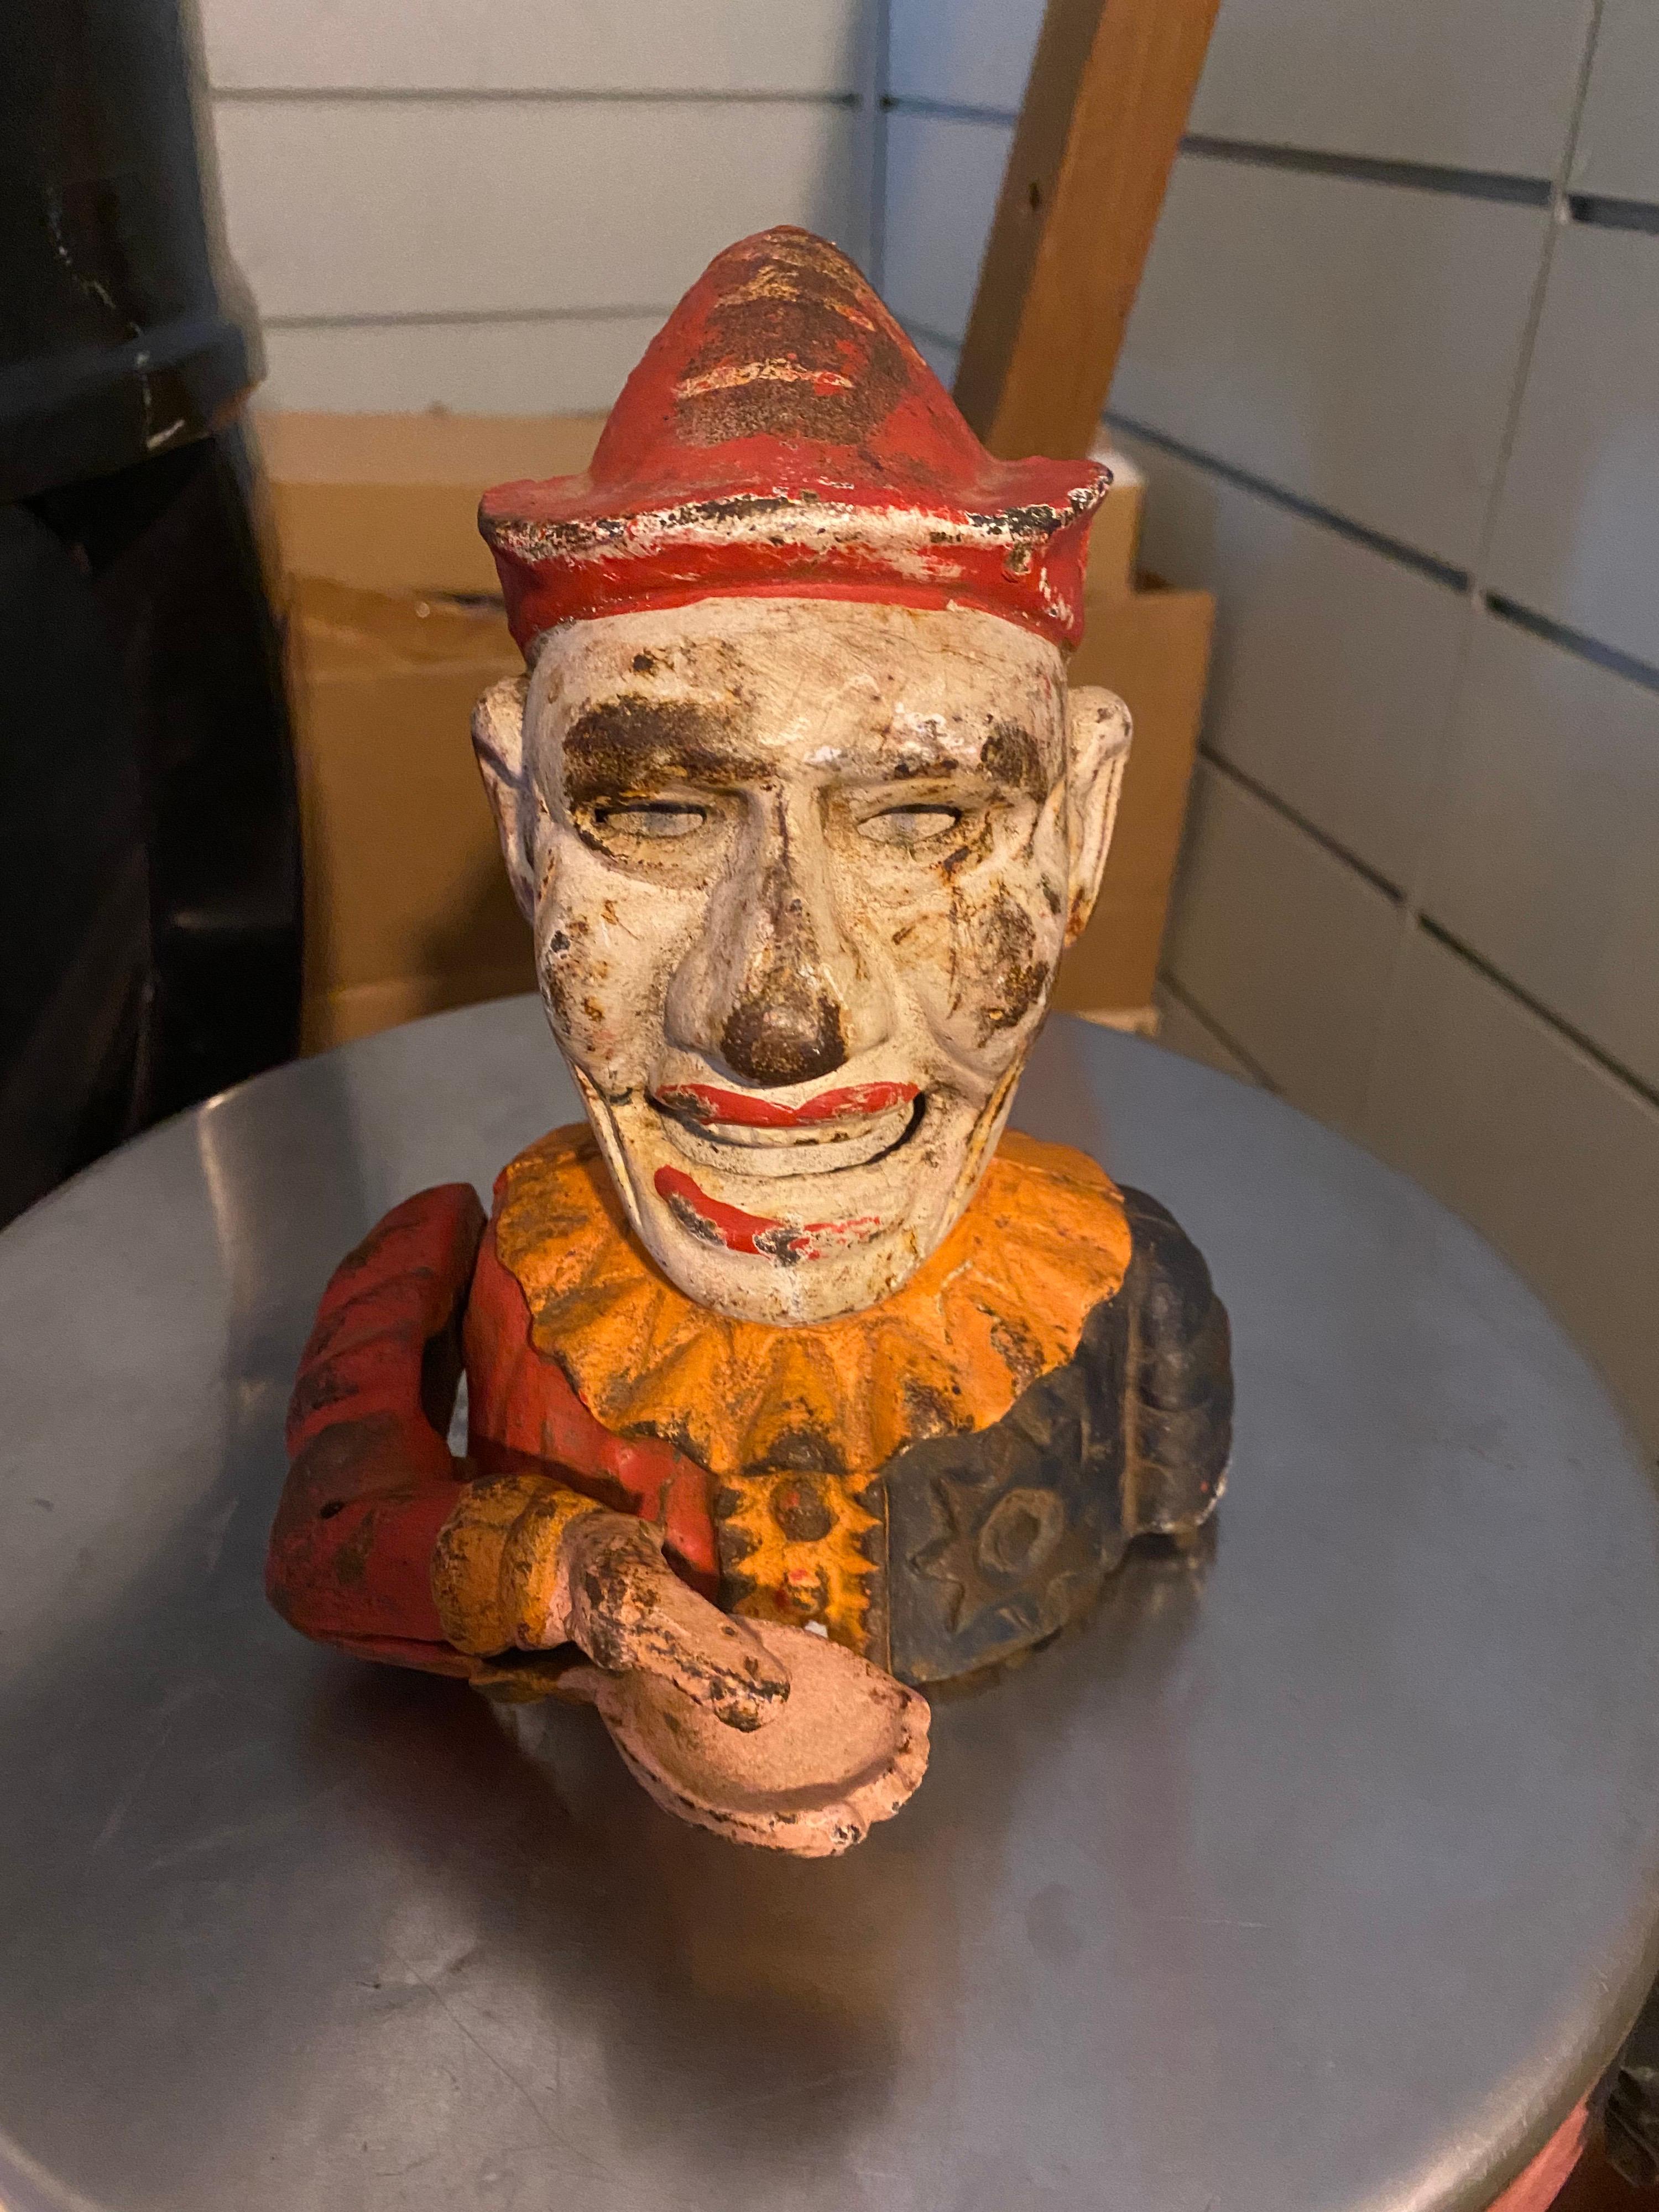 1900S Hand painted Pierrot the cast iron mechanical penny bank clown. Very colorful mechanical bank known as the Humpty Dumpty Bank and shows a clown with his mouth open and his swinging arm having an open hand where you would put the penny.